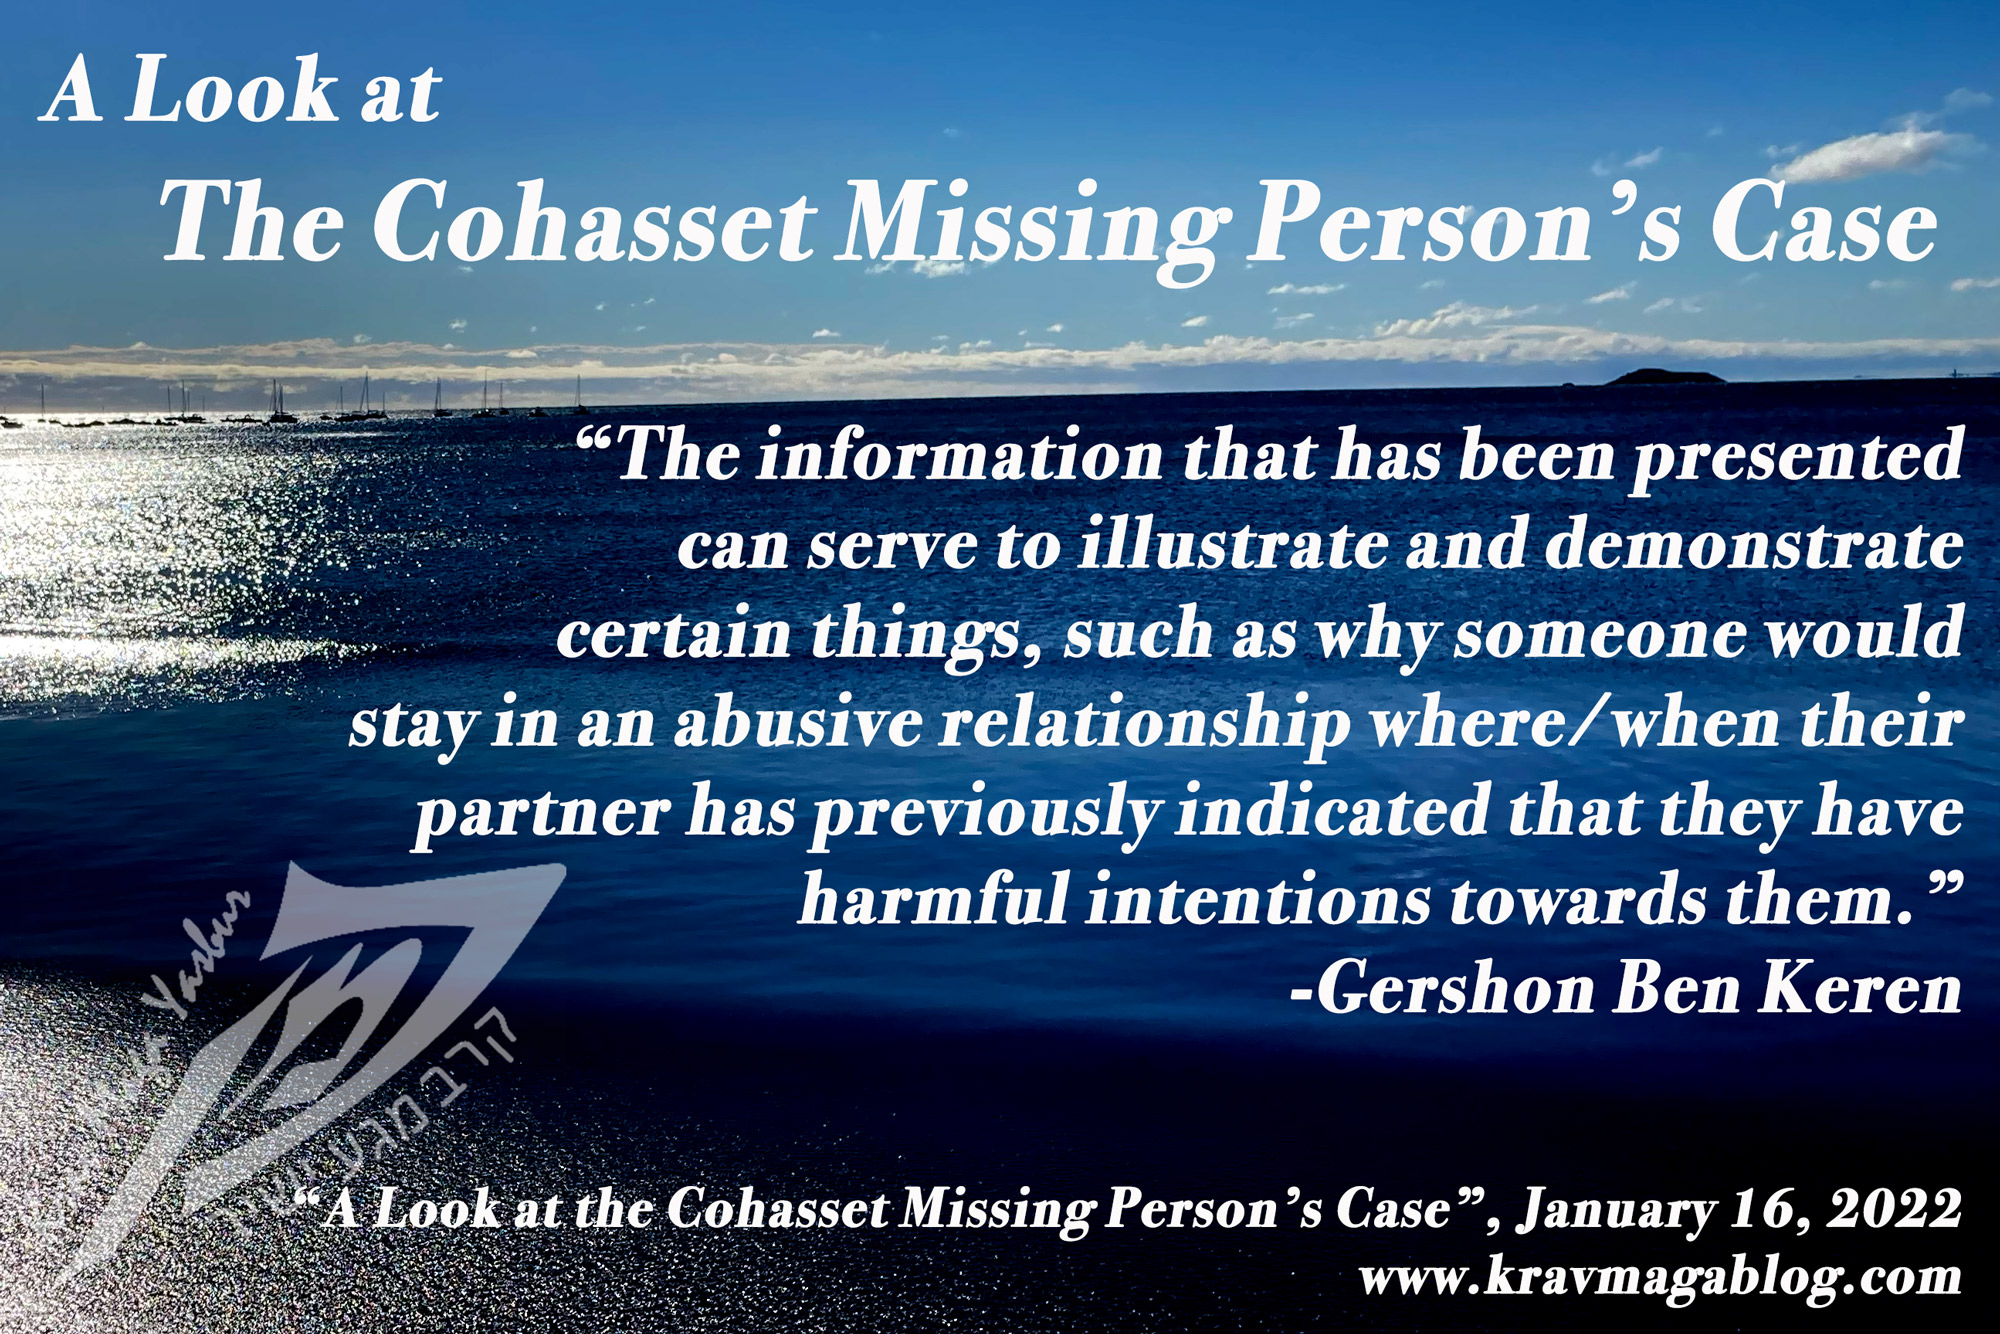 Blog About The Cohasset Missing Person Case